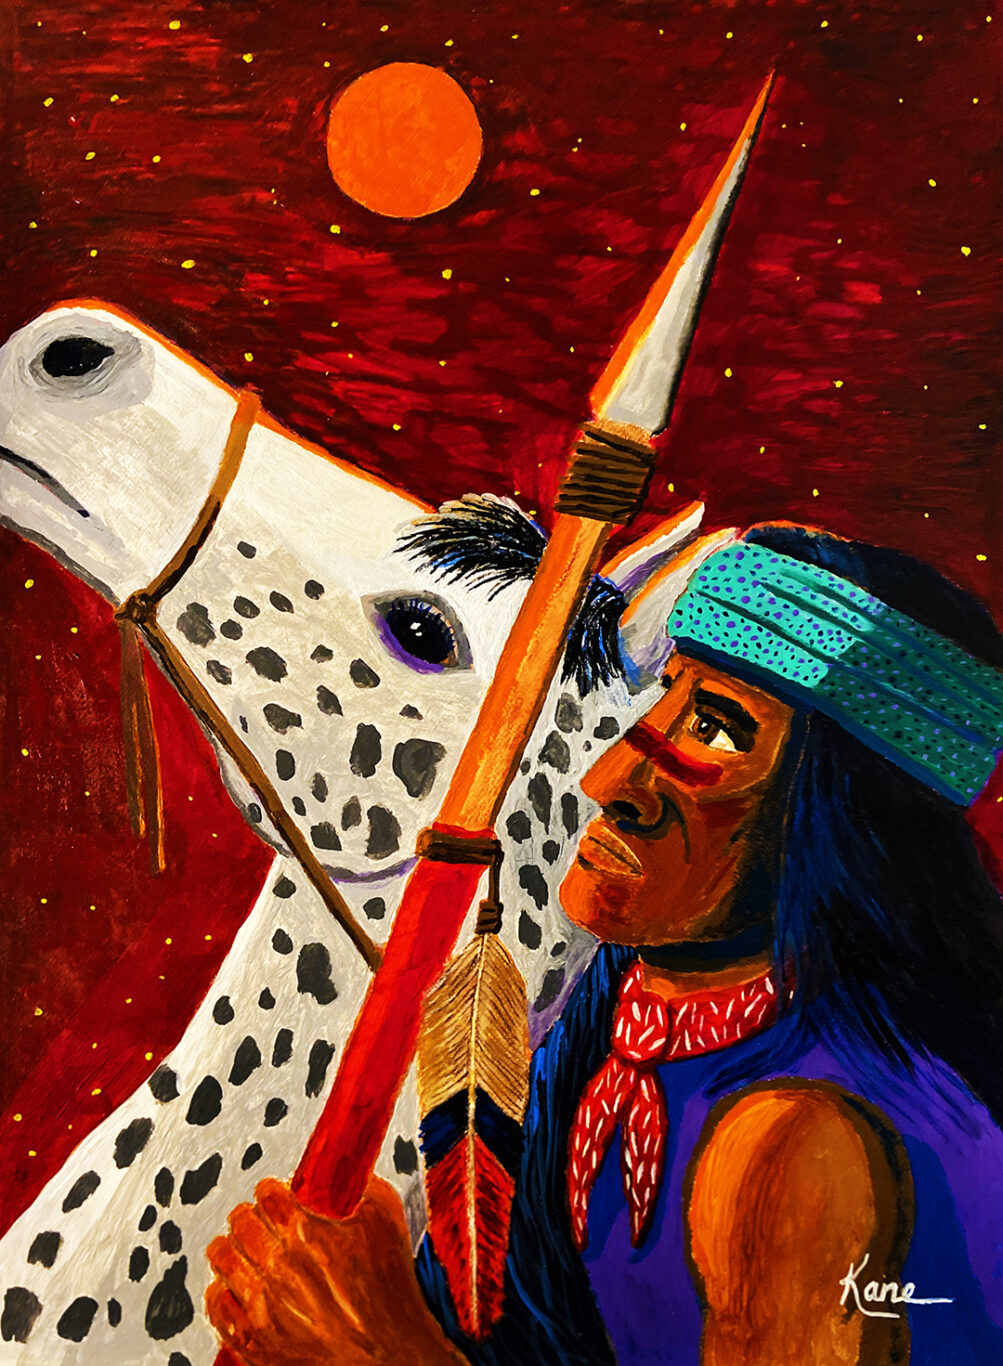 Image of Apache on white horse with red night sky background. Title: Apache Dream: Night Flight From the Rez